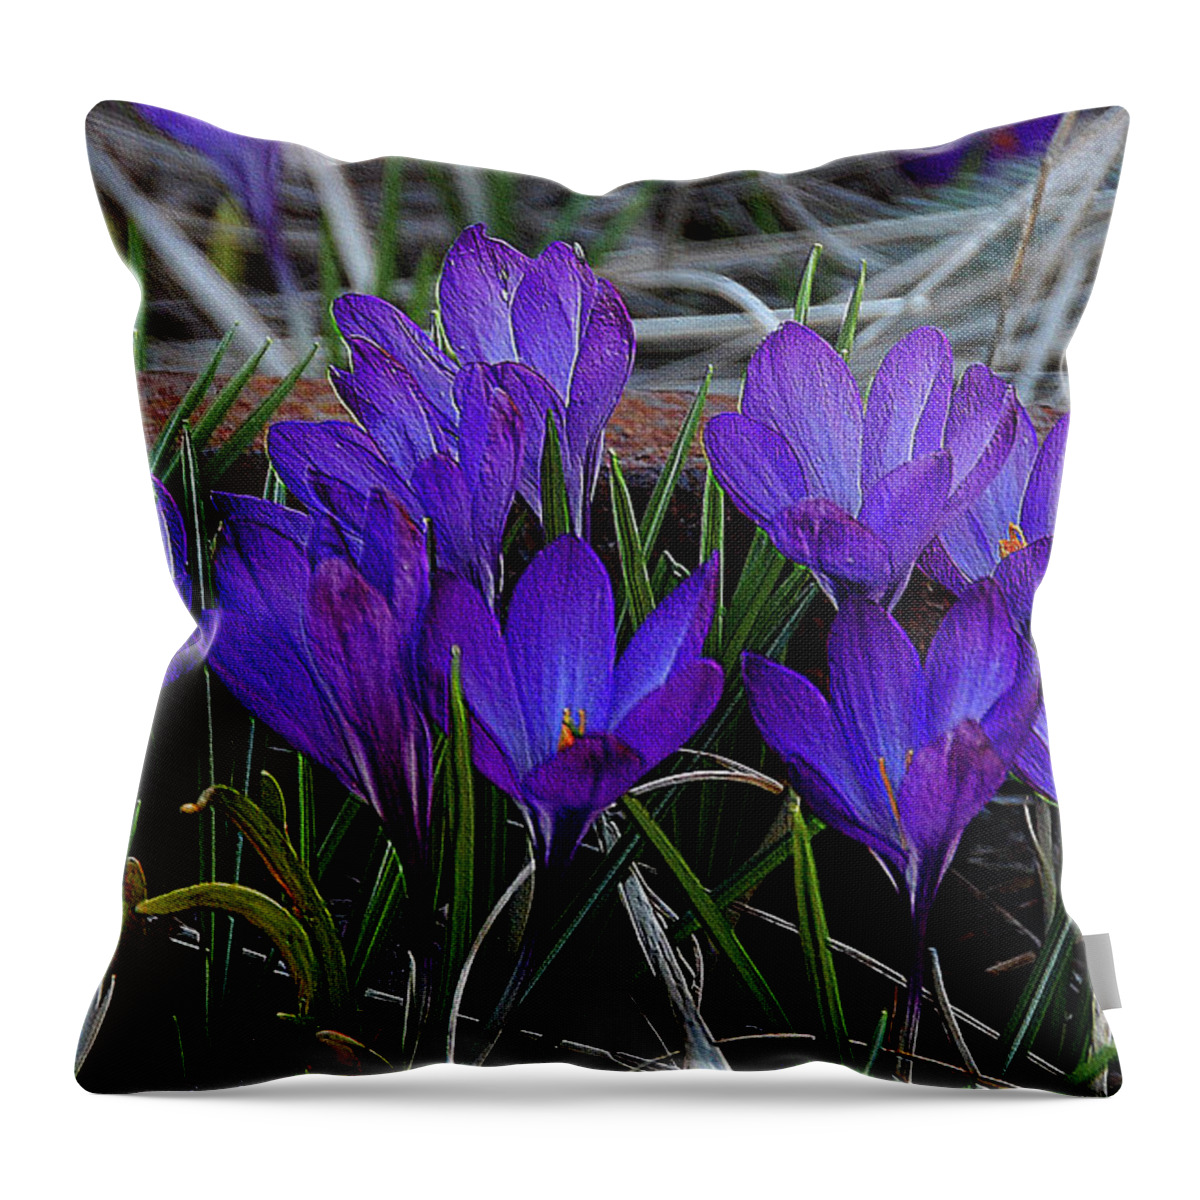 Digital Throw Pillow featuring the painting Purple Crocus by Elaine Manley